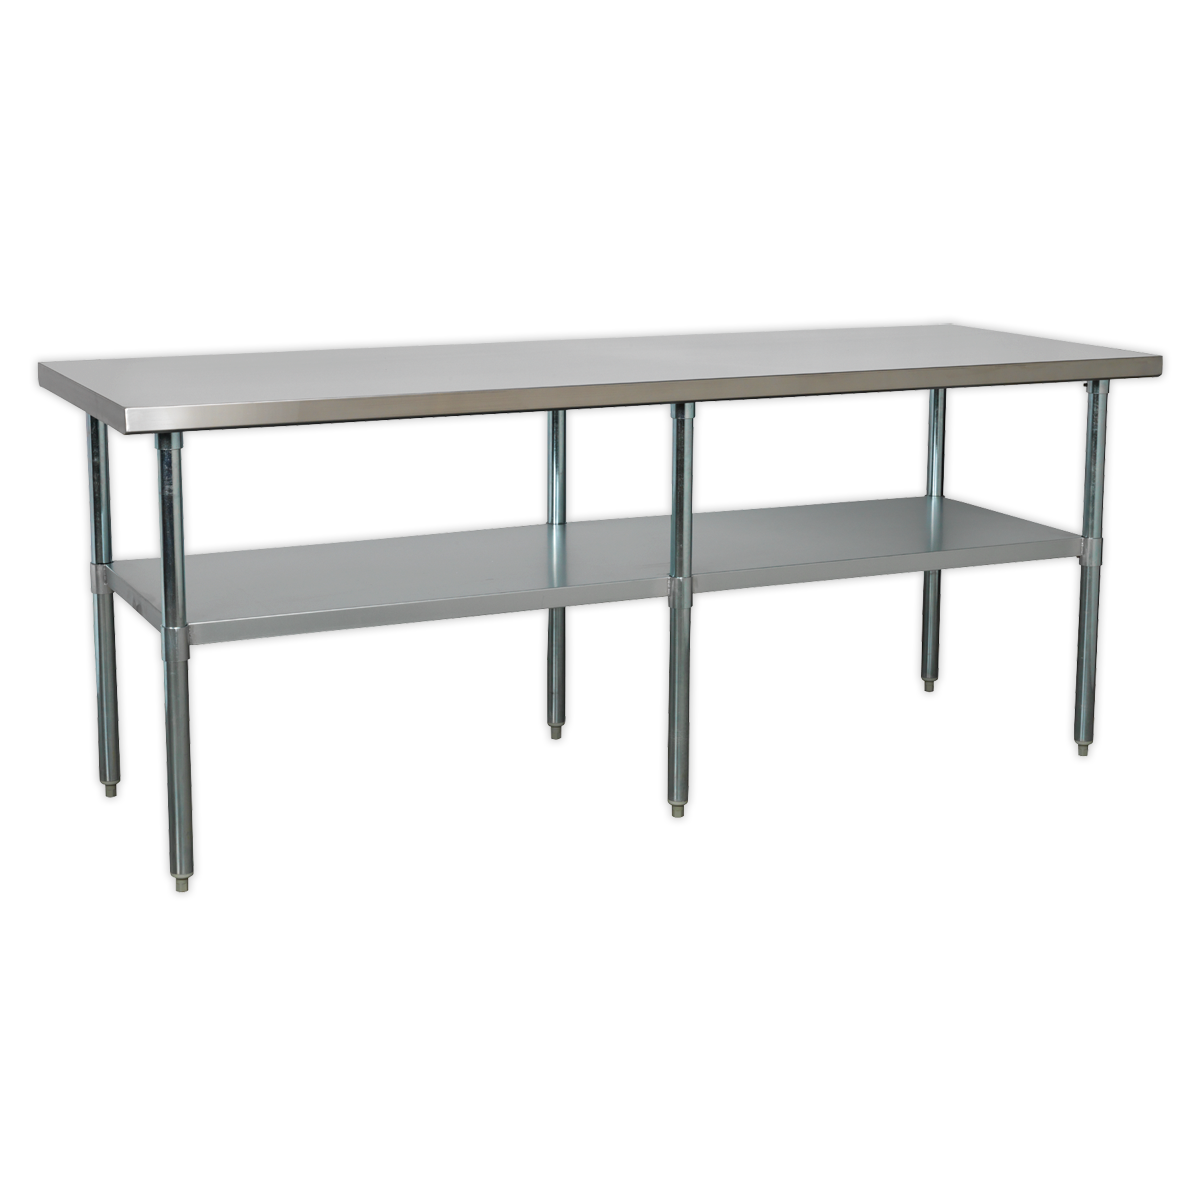 Stainless Steel Workbench 2.1m - AP2184SS - Farming Parts